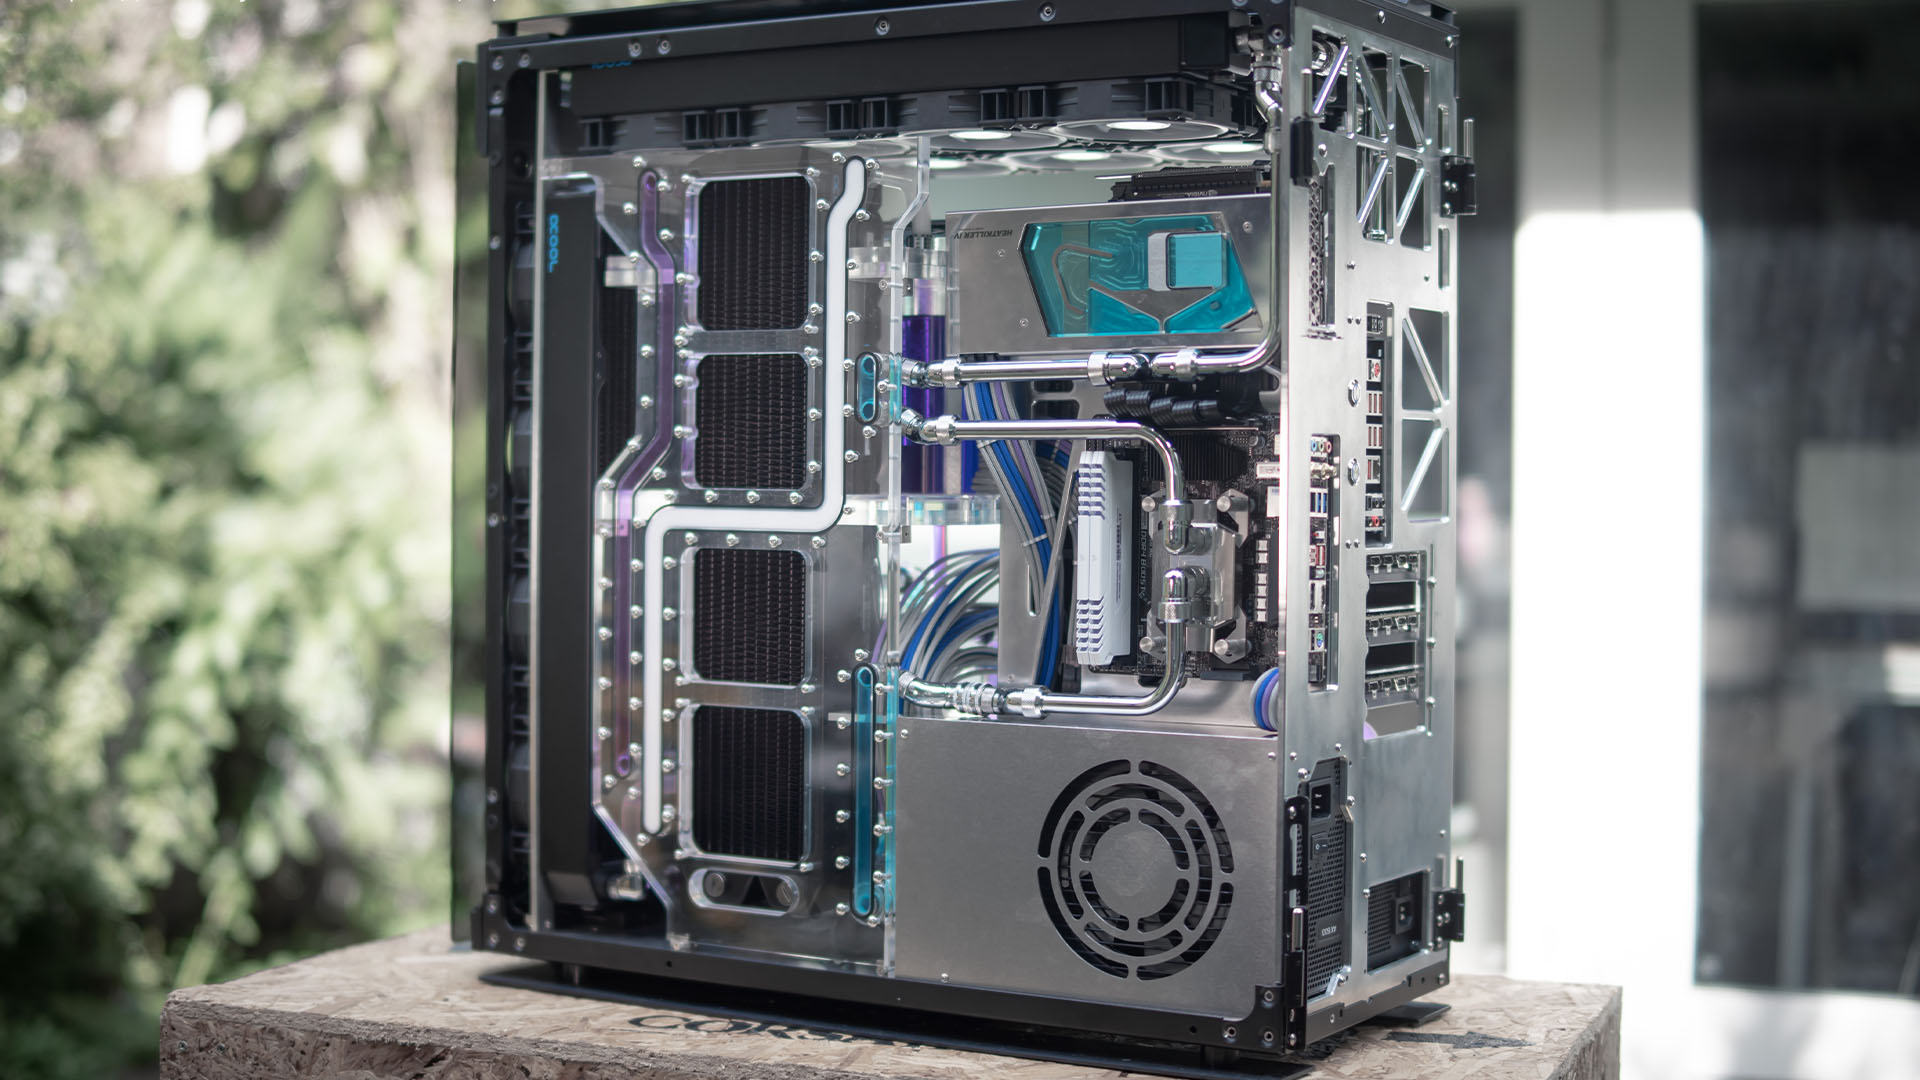 There are two rigs in this monster water-cooled gaming PC build